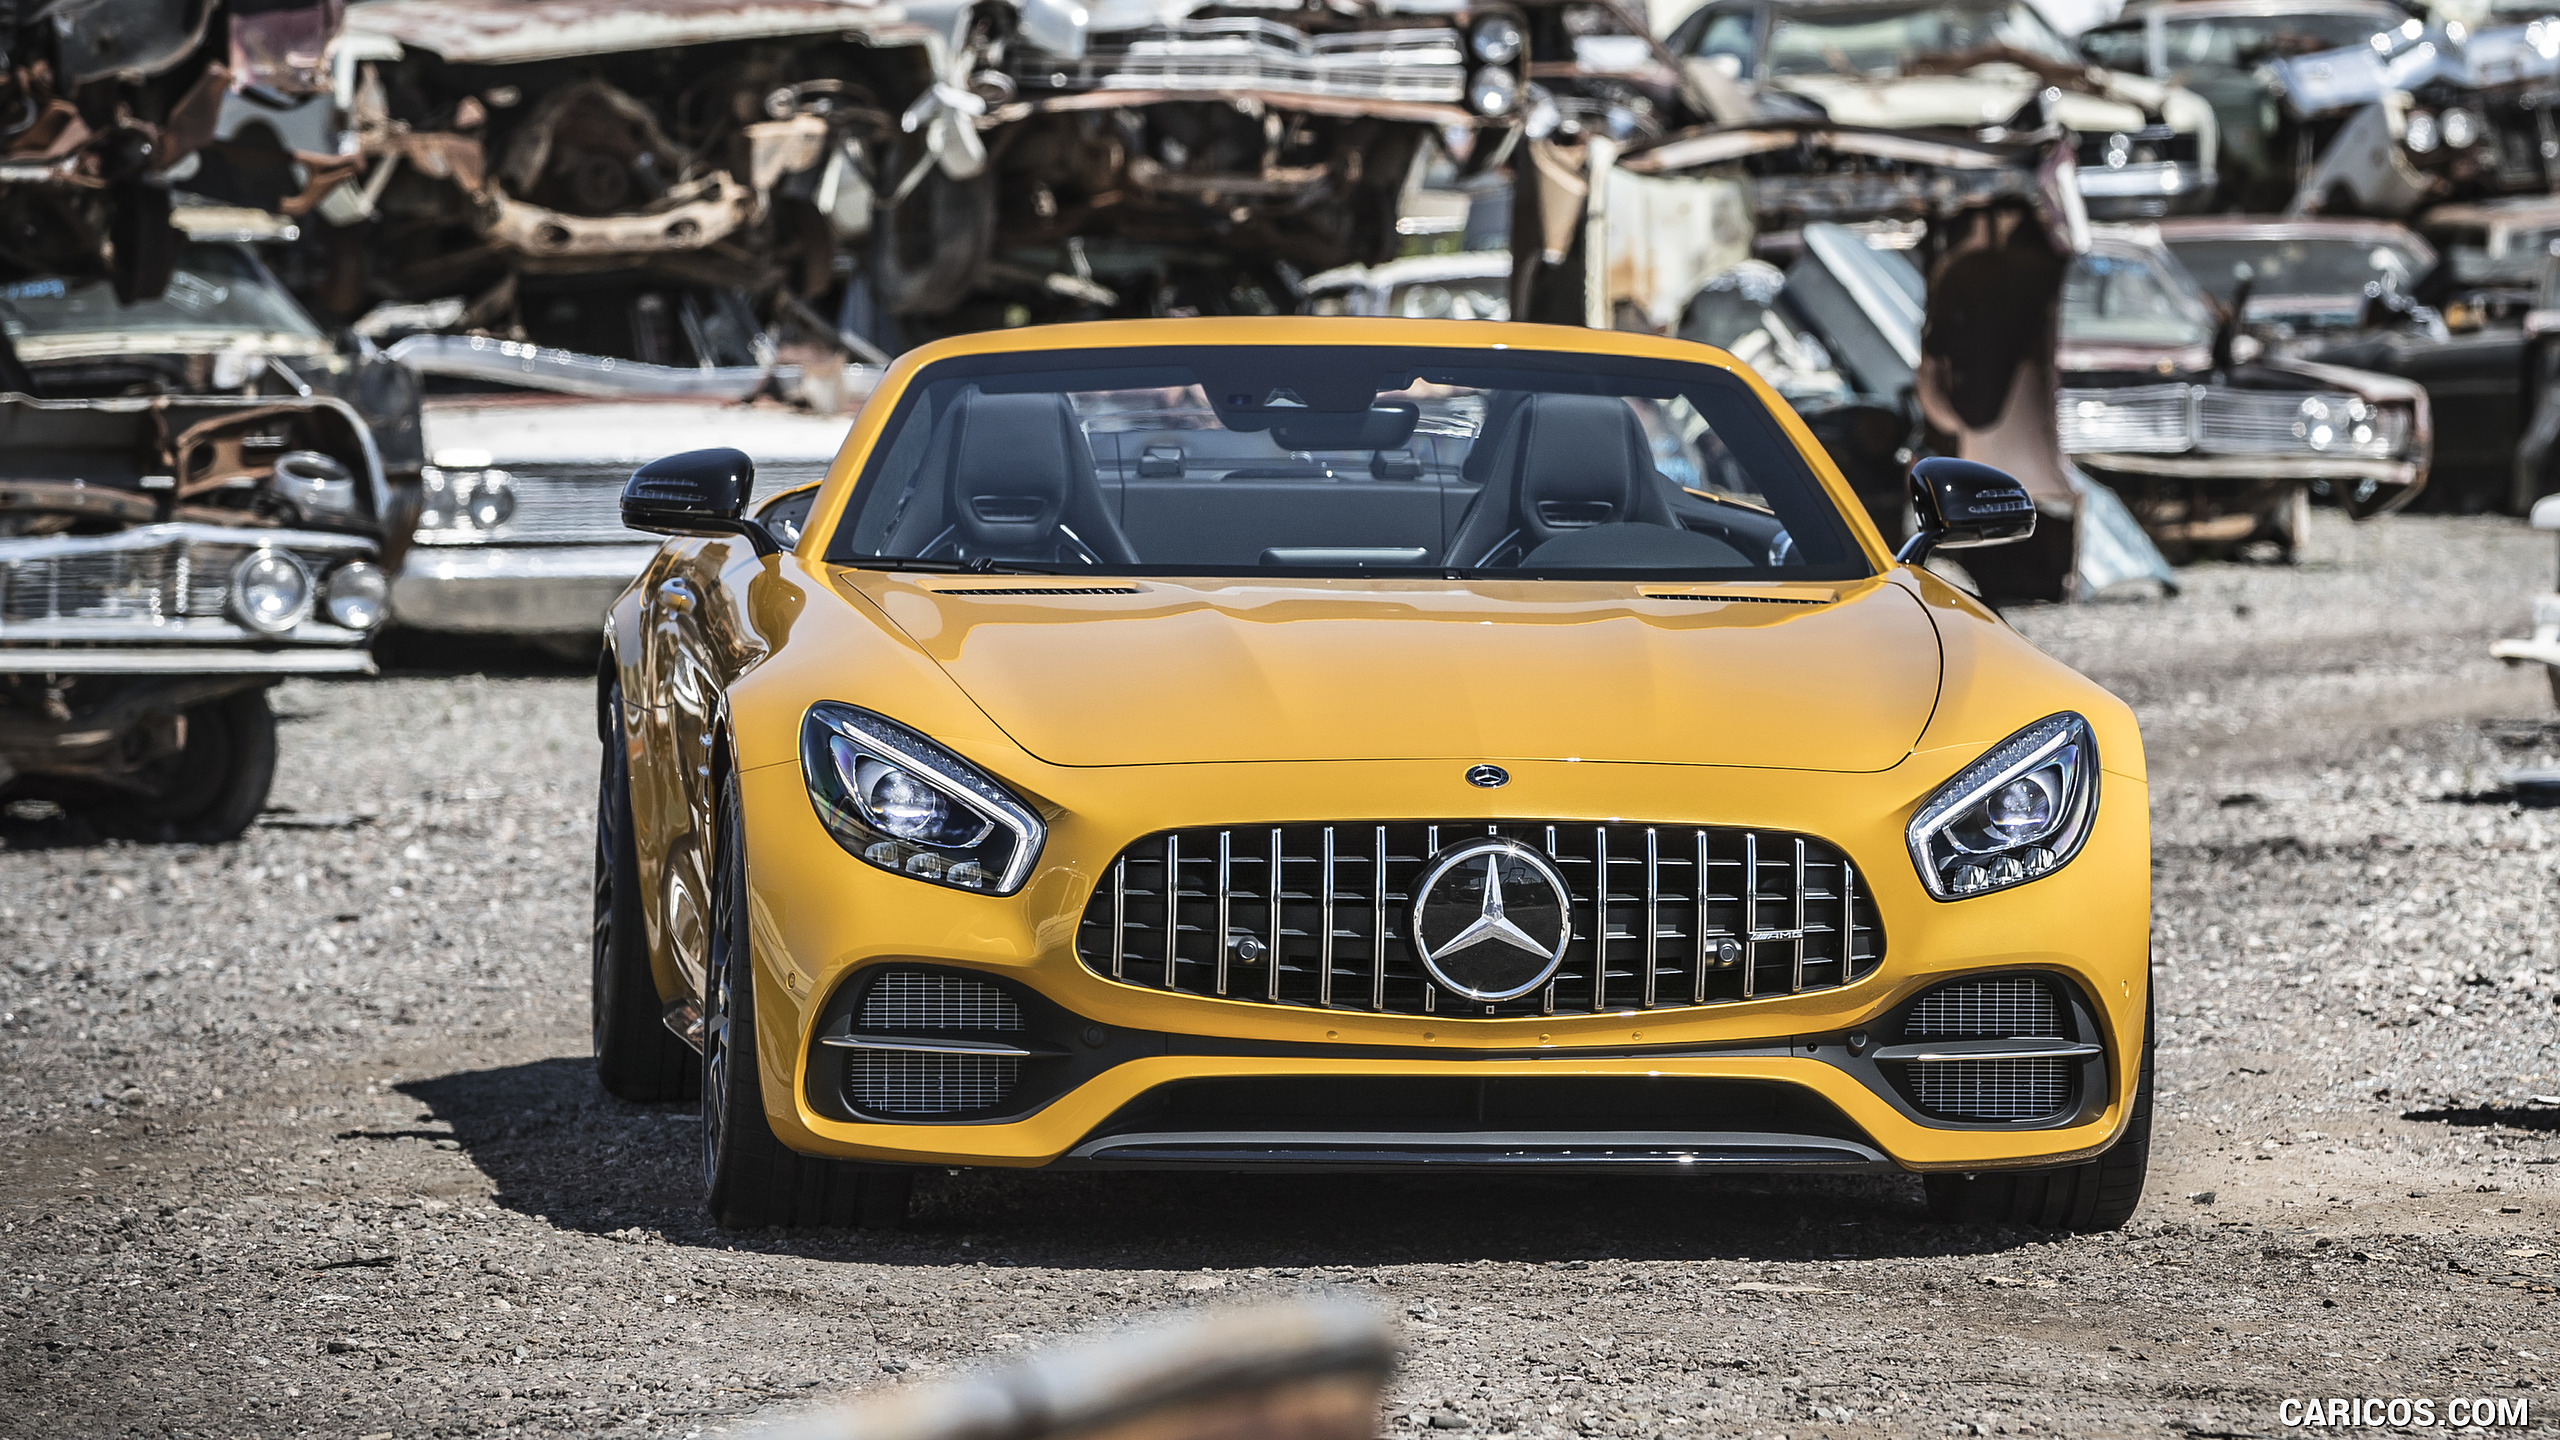 2018 Mercedes-AMG GT C Roadster - Front, #214 of 350